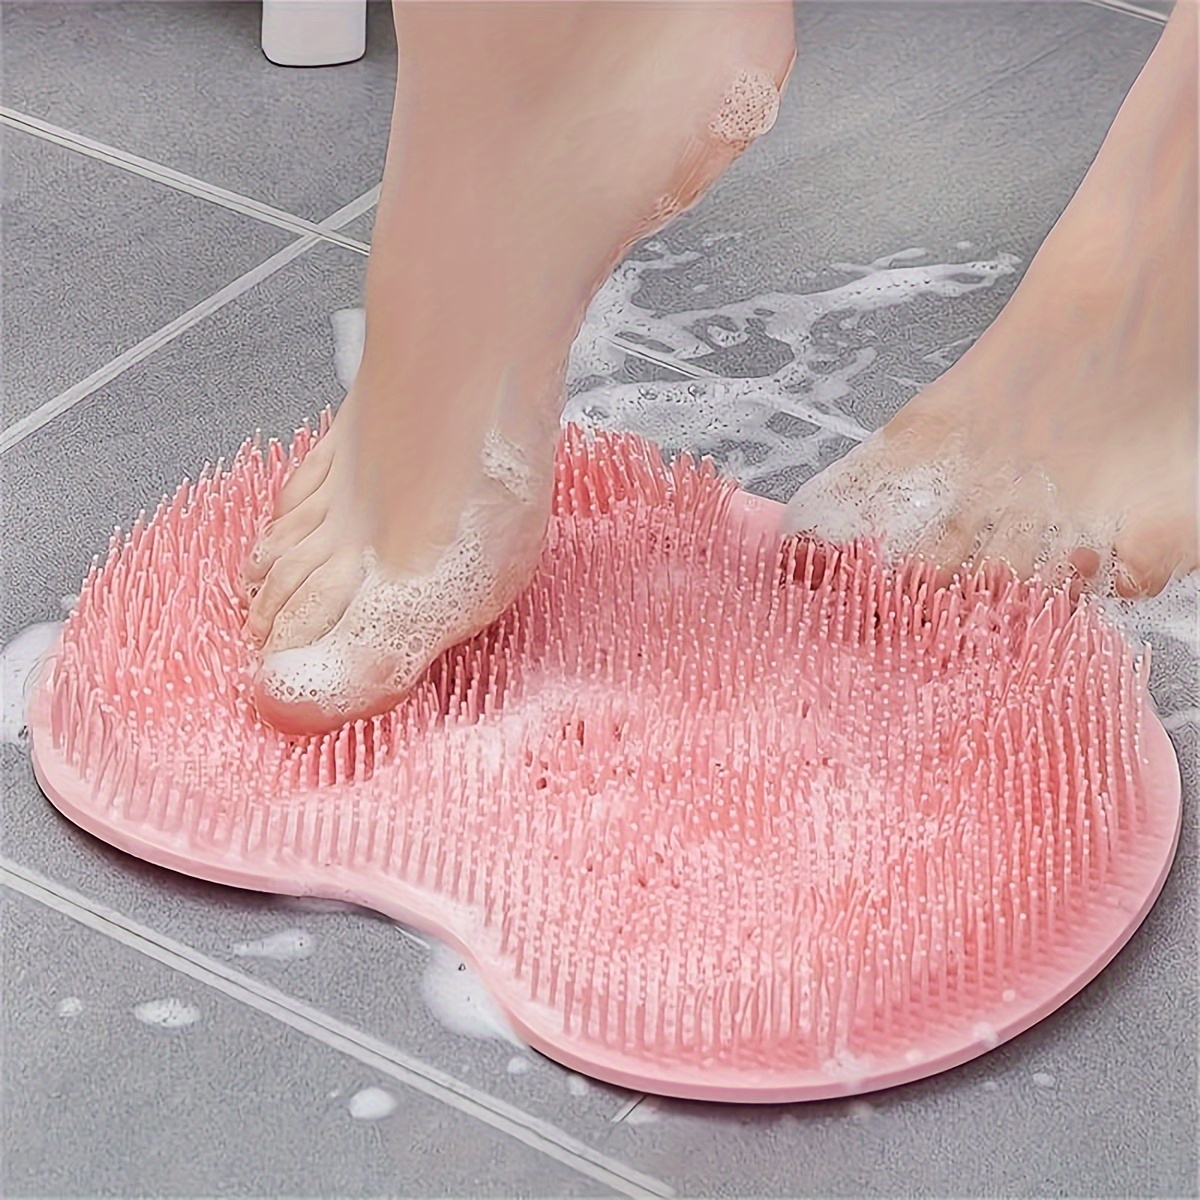 

Silicone Foot Scrubber Bath Mat, 1pc Non-slip Shower Exfoliation Pad With Suction Cups For Skin Rejuvenation, Unscented, Power-free, Battery-free Bath & Body Brush